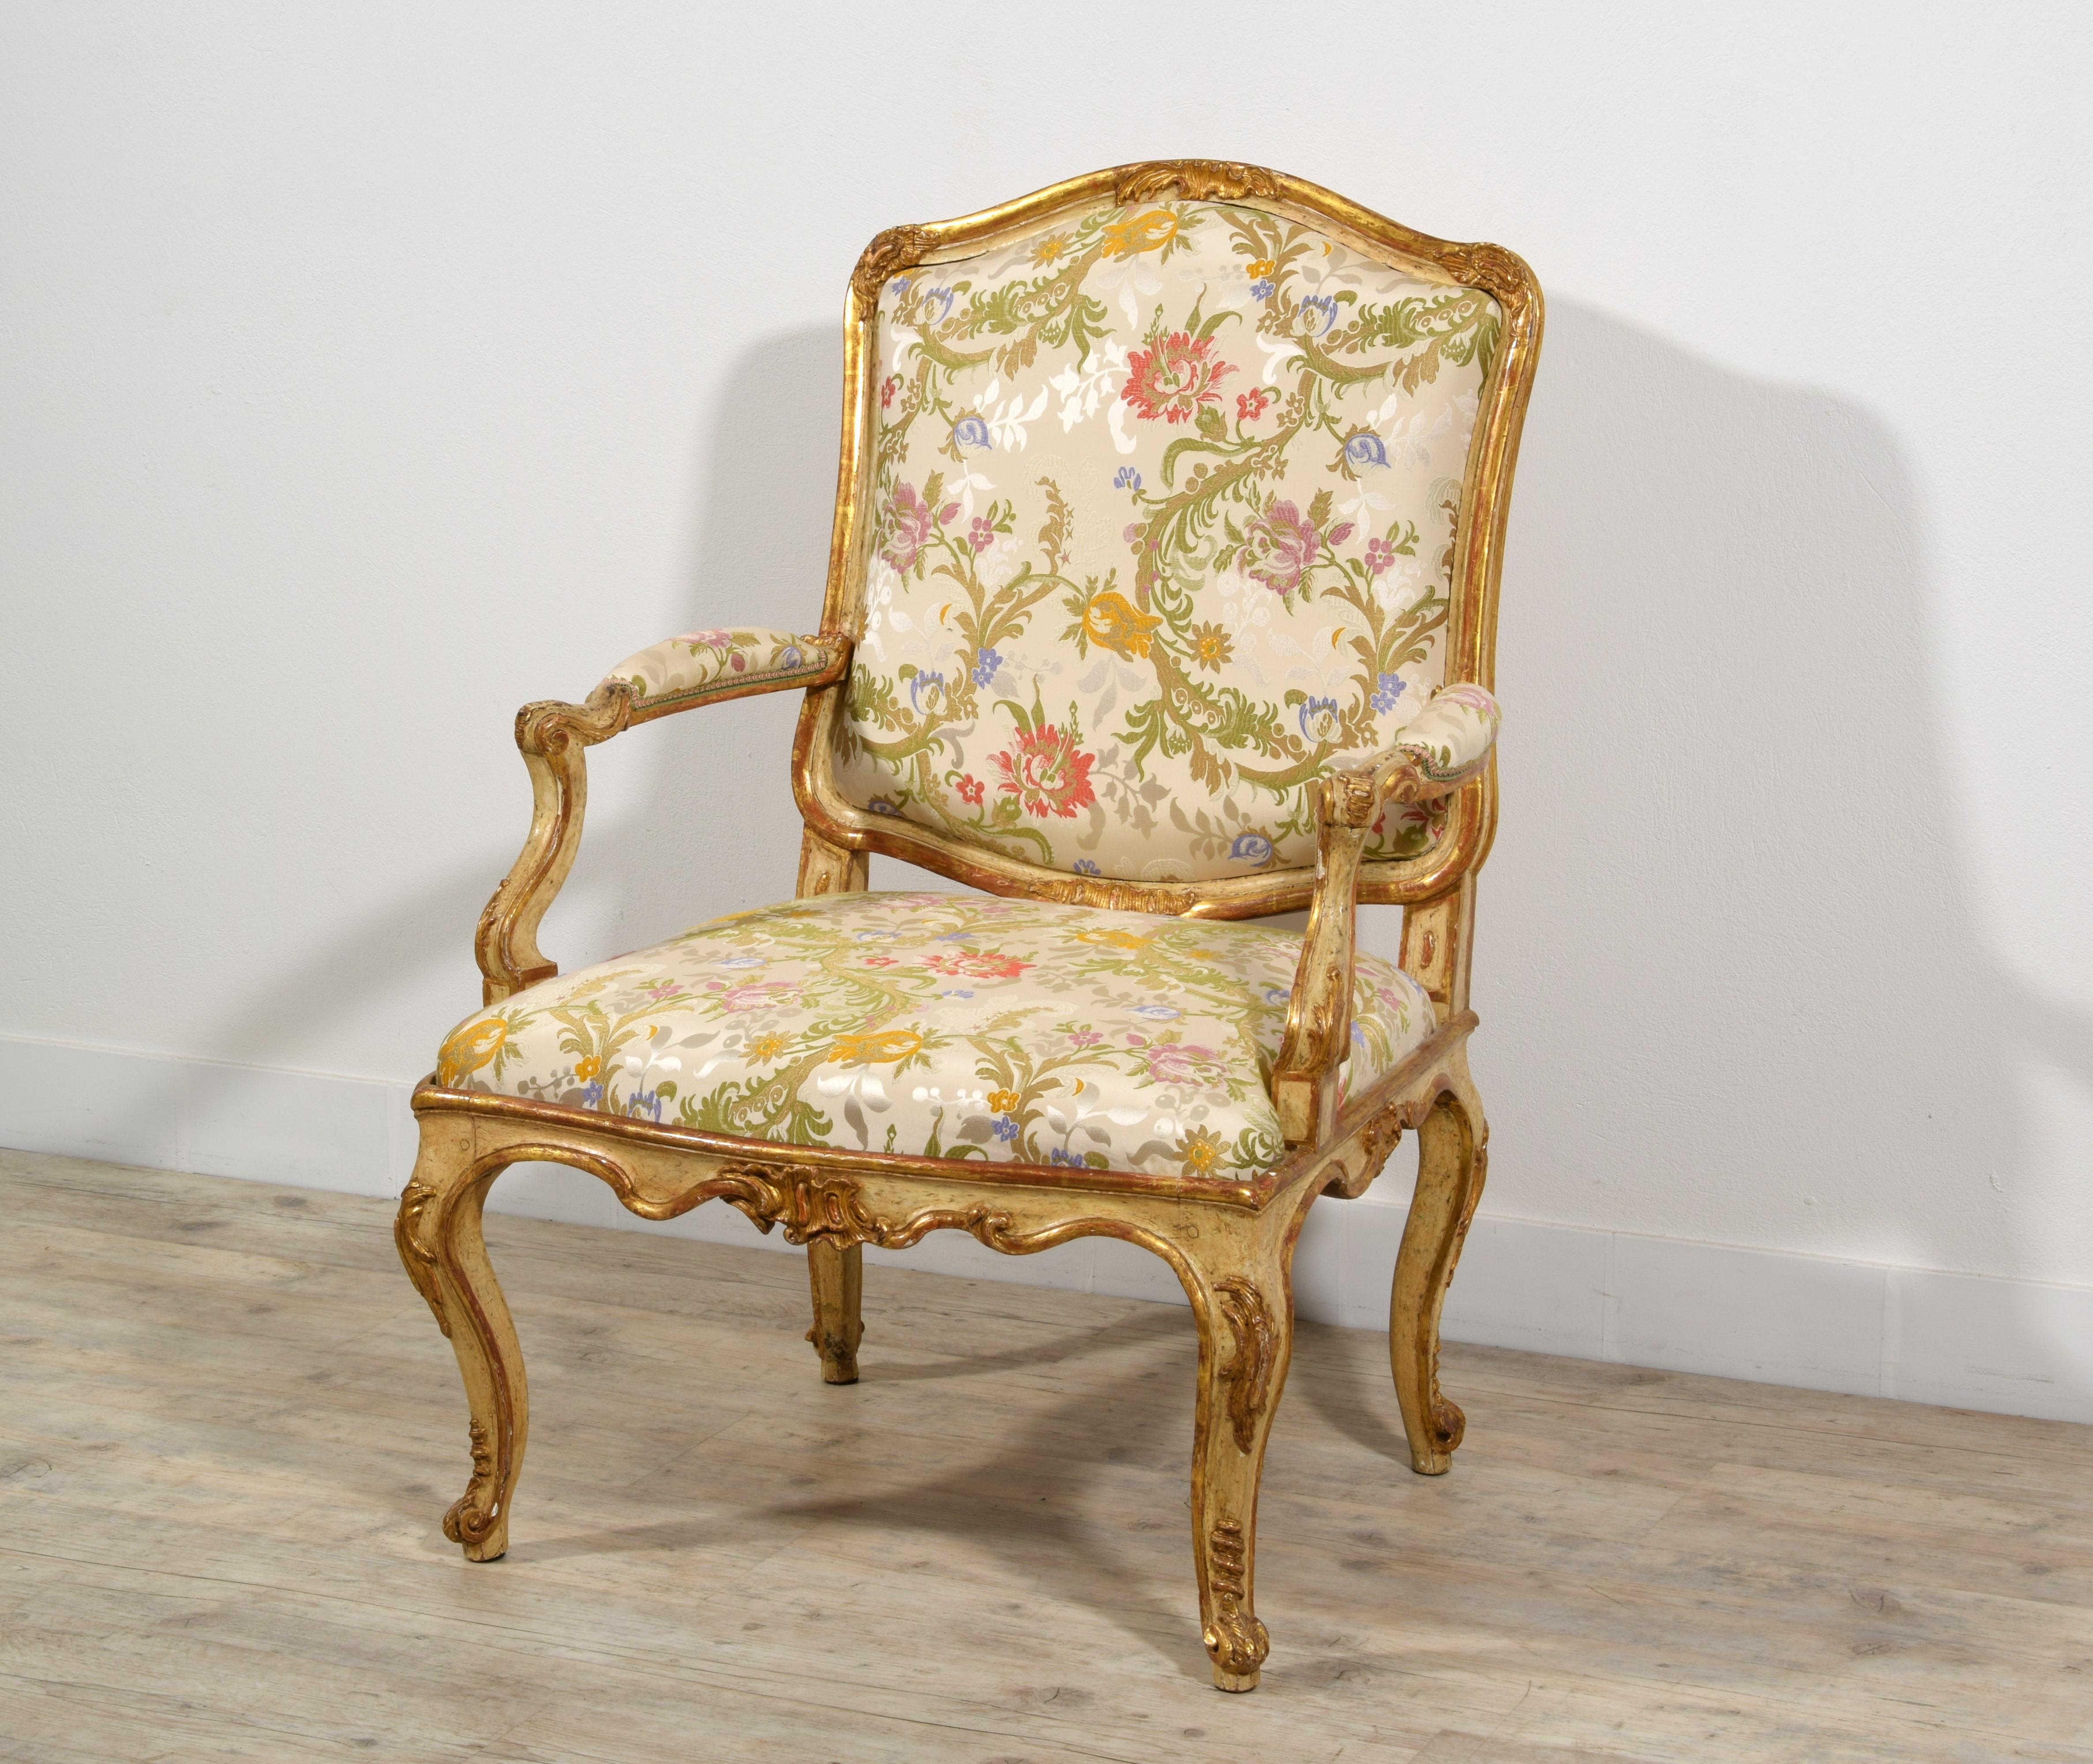 18th century, Italian Baroque Lacquered and Giltwood Armchairs 
This elegant armchair was made in the Baroque period in Turin, around the middle of the eighteenth century. The structure of the armchair is in finely carved wood, lacquered in ivory